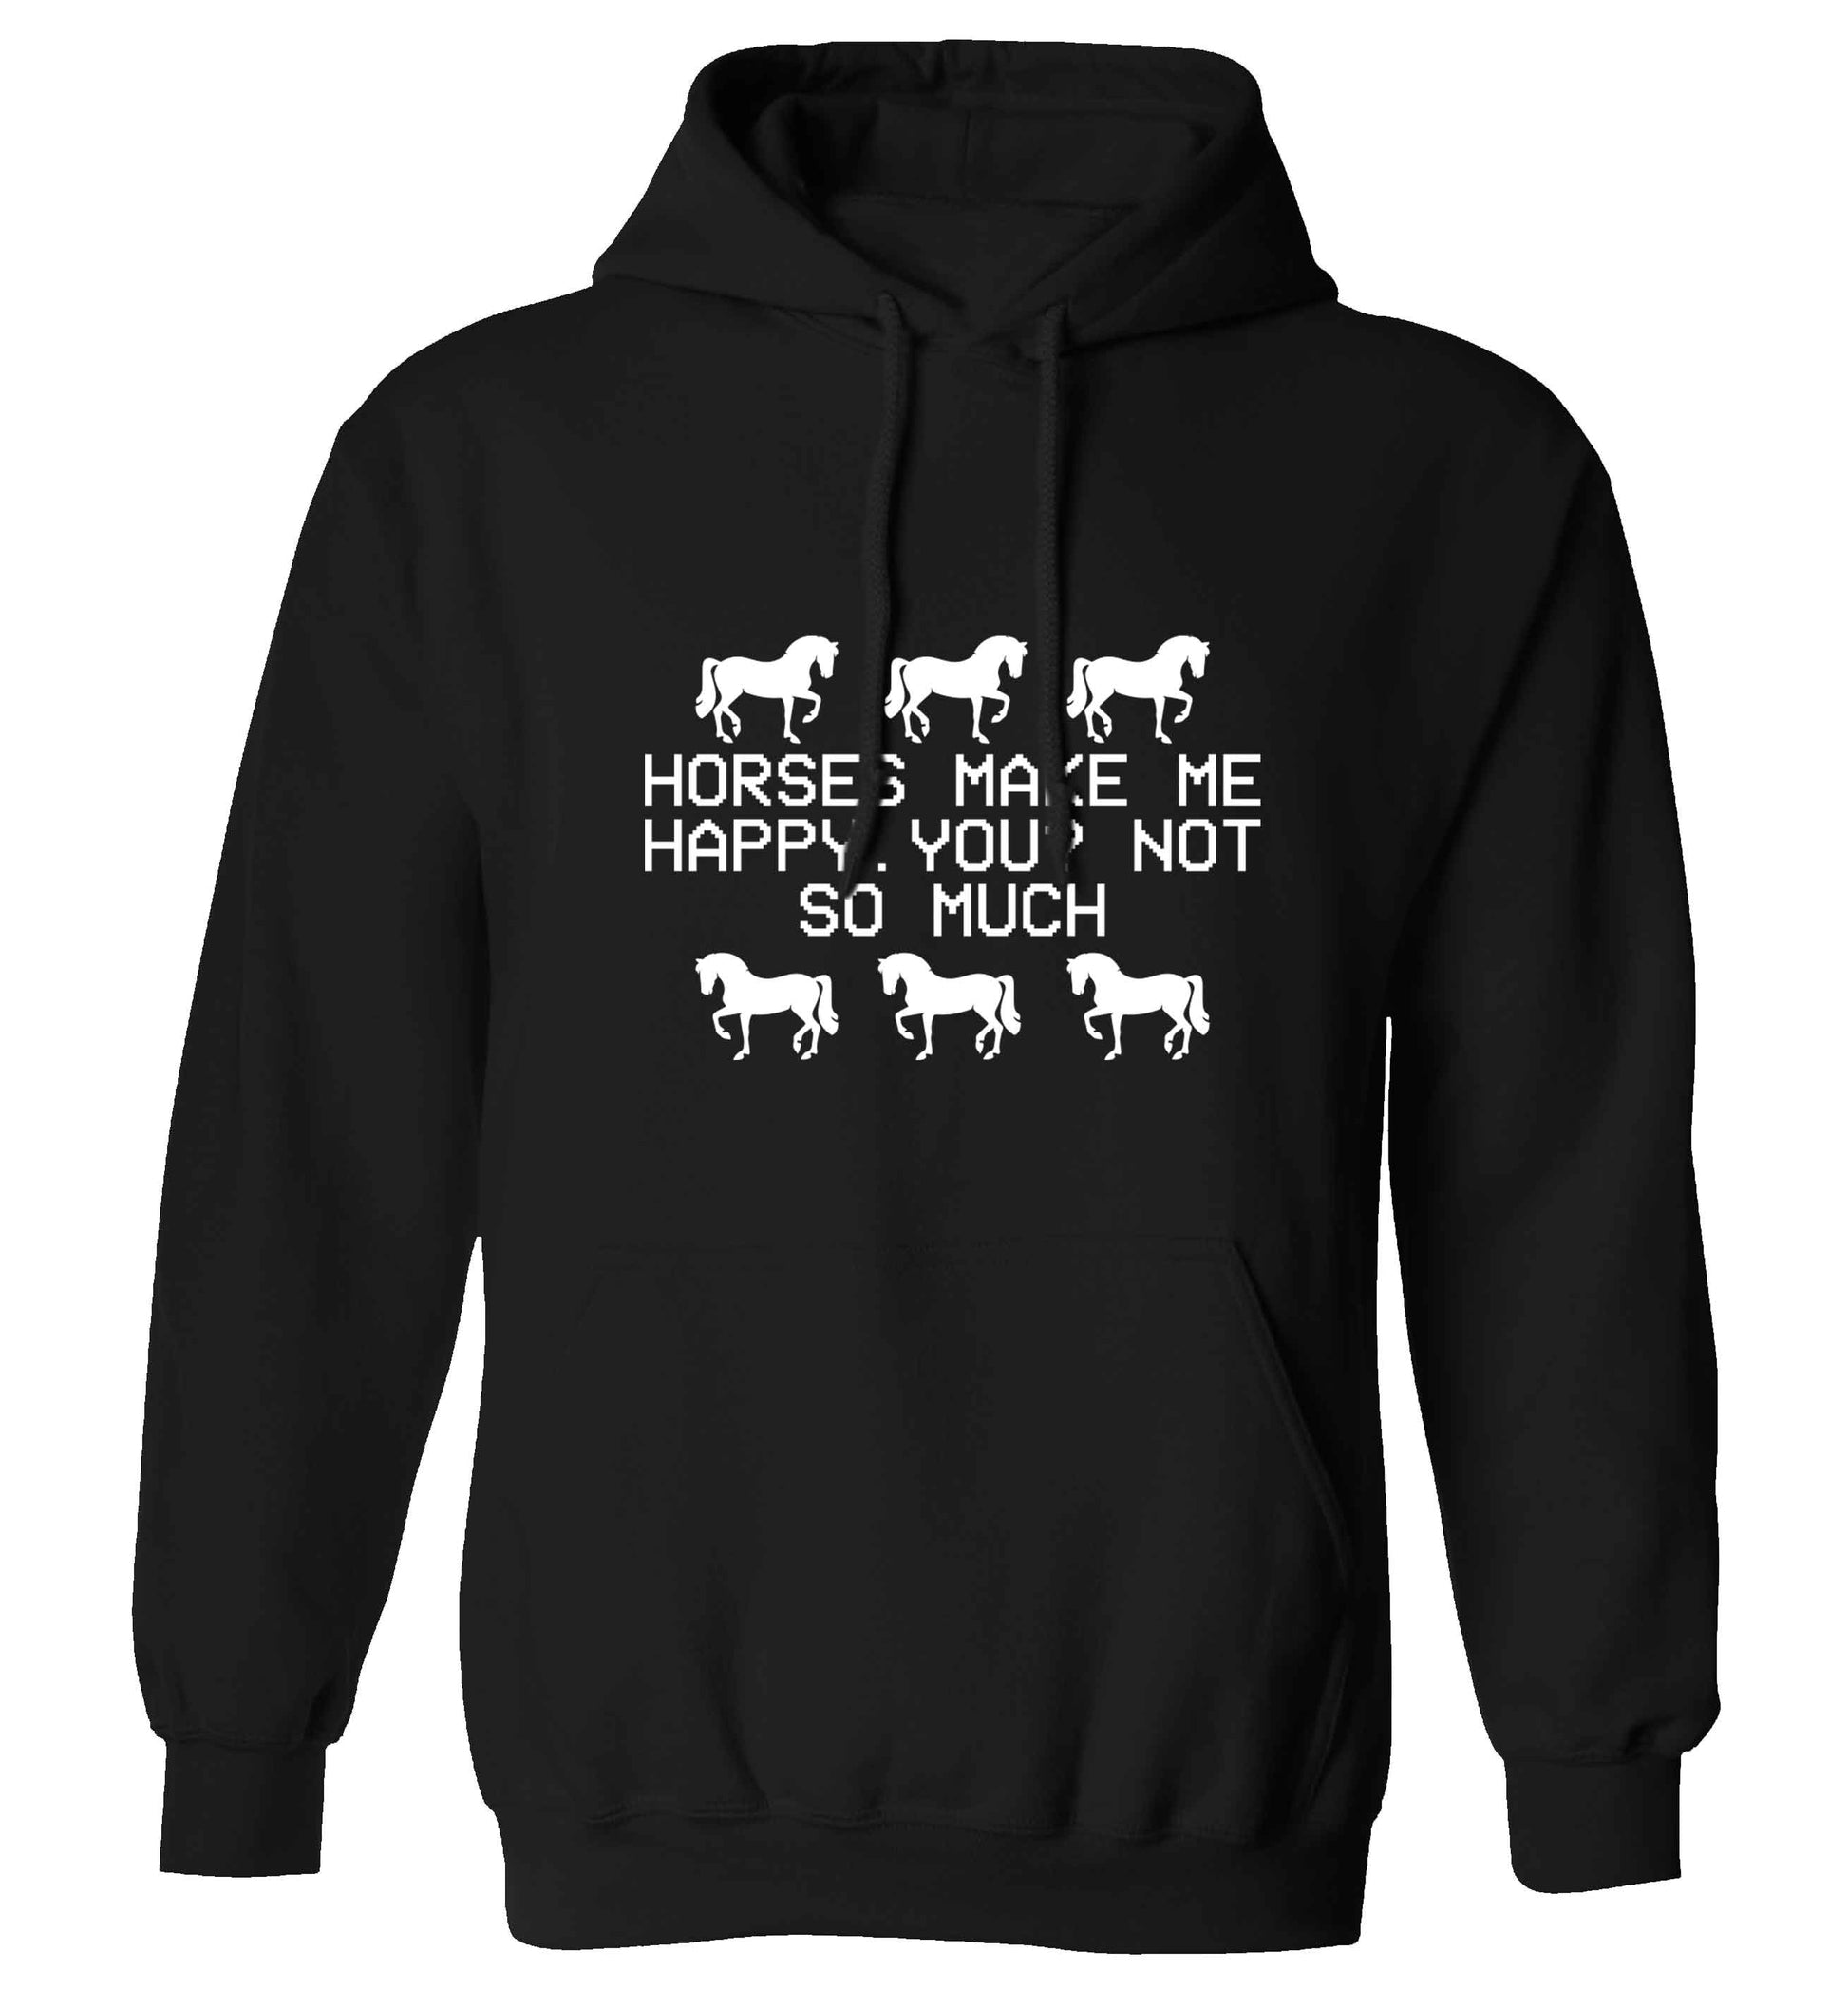 Horses make me happy, you not so much adults unisex black hoodie 2XL